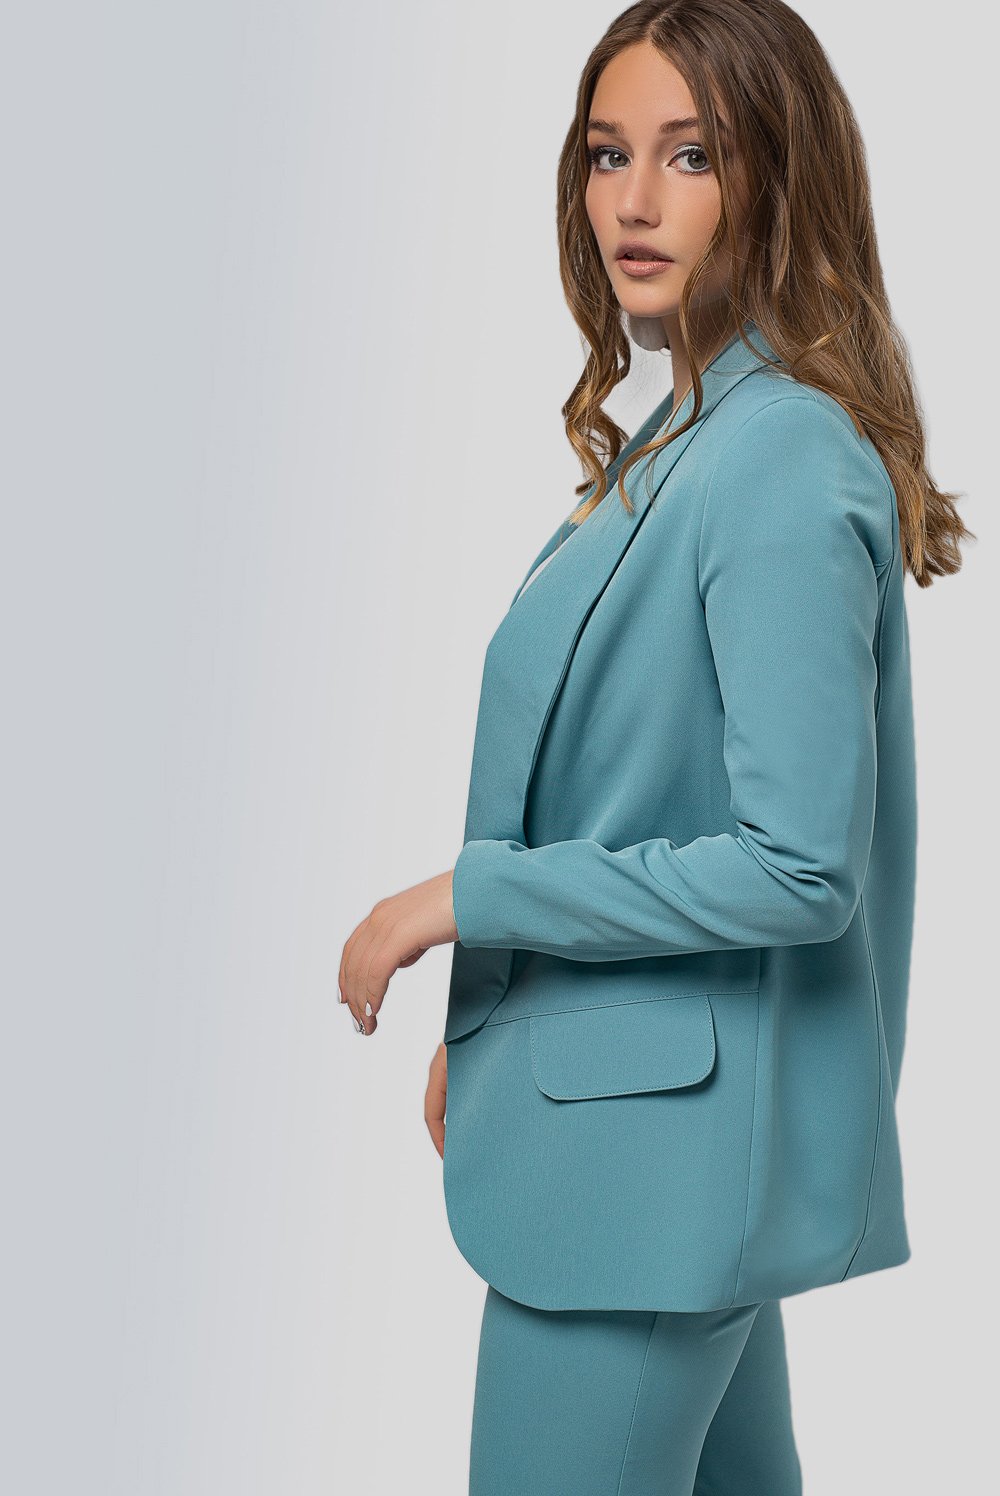 Turquoise blazer with a collar apache